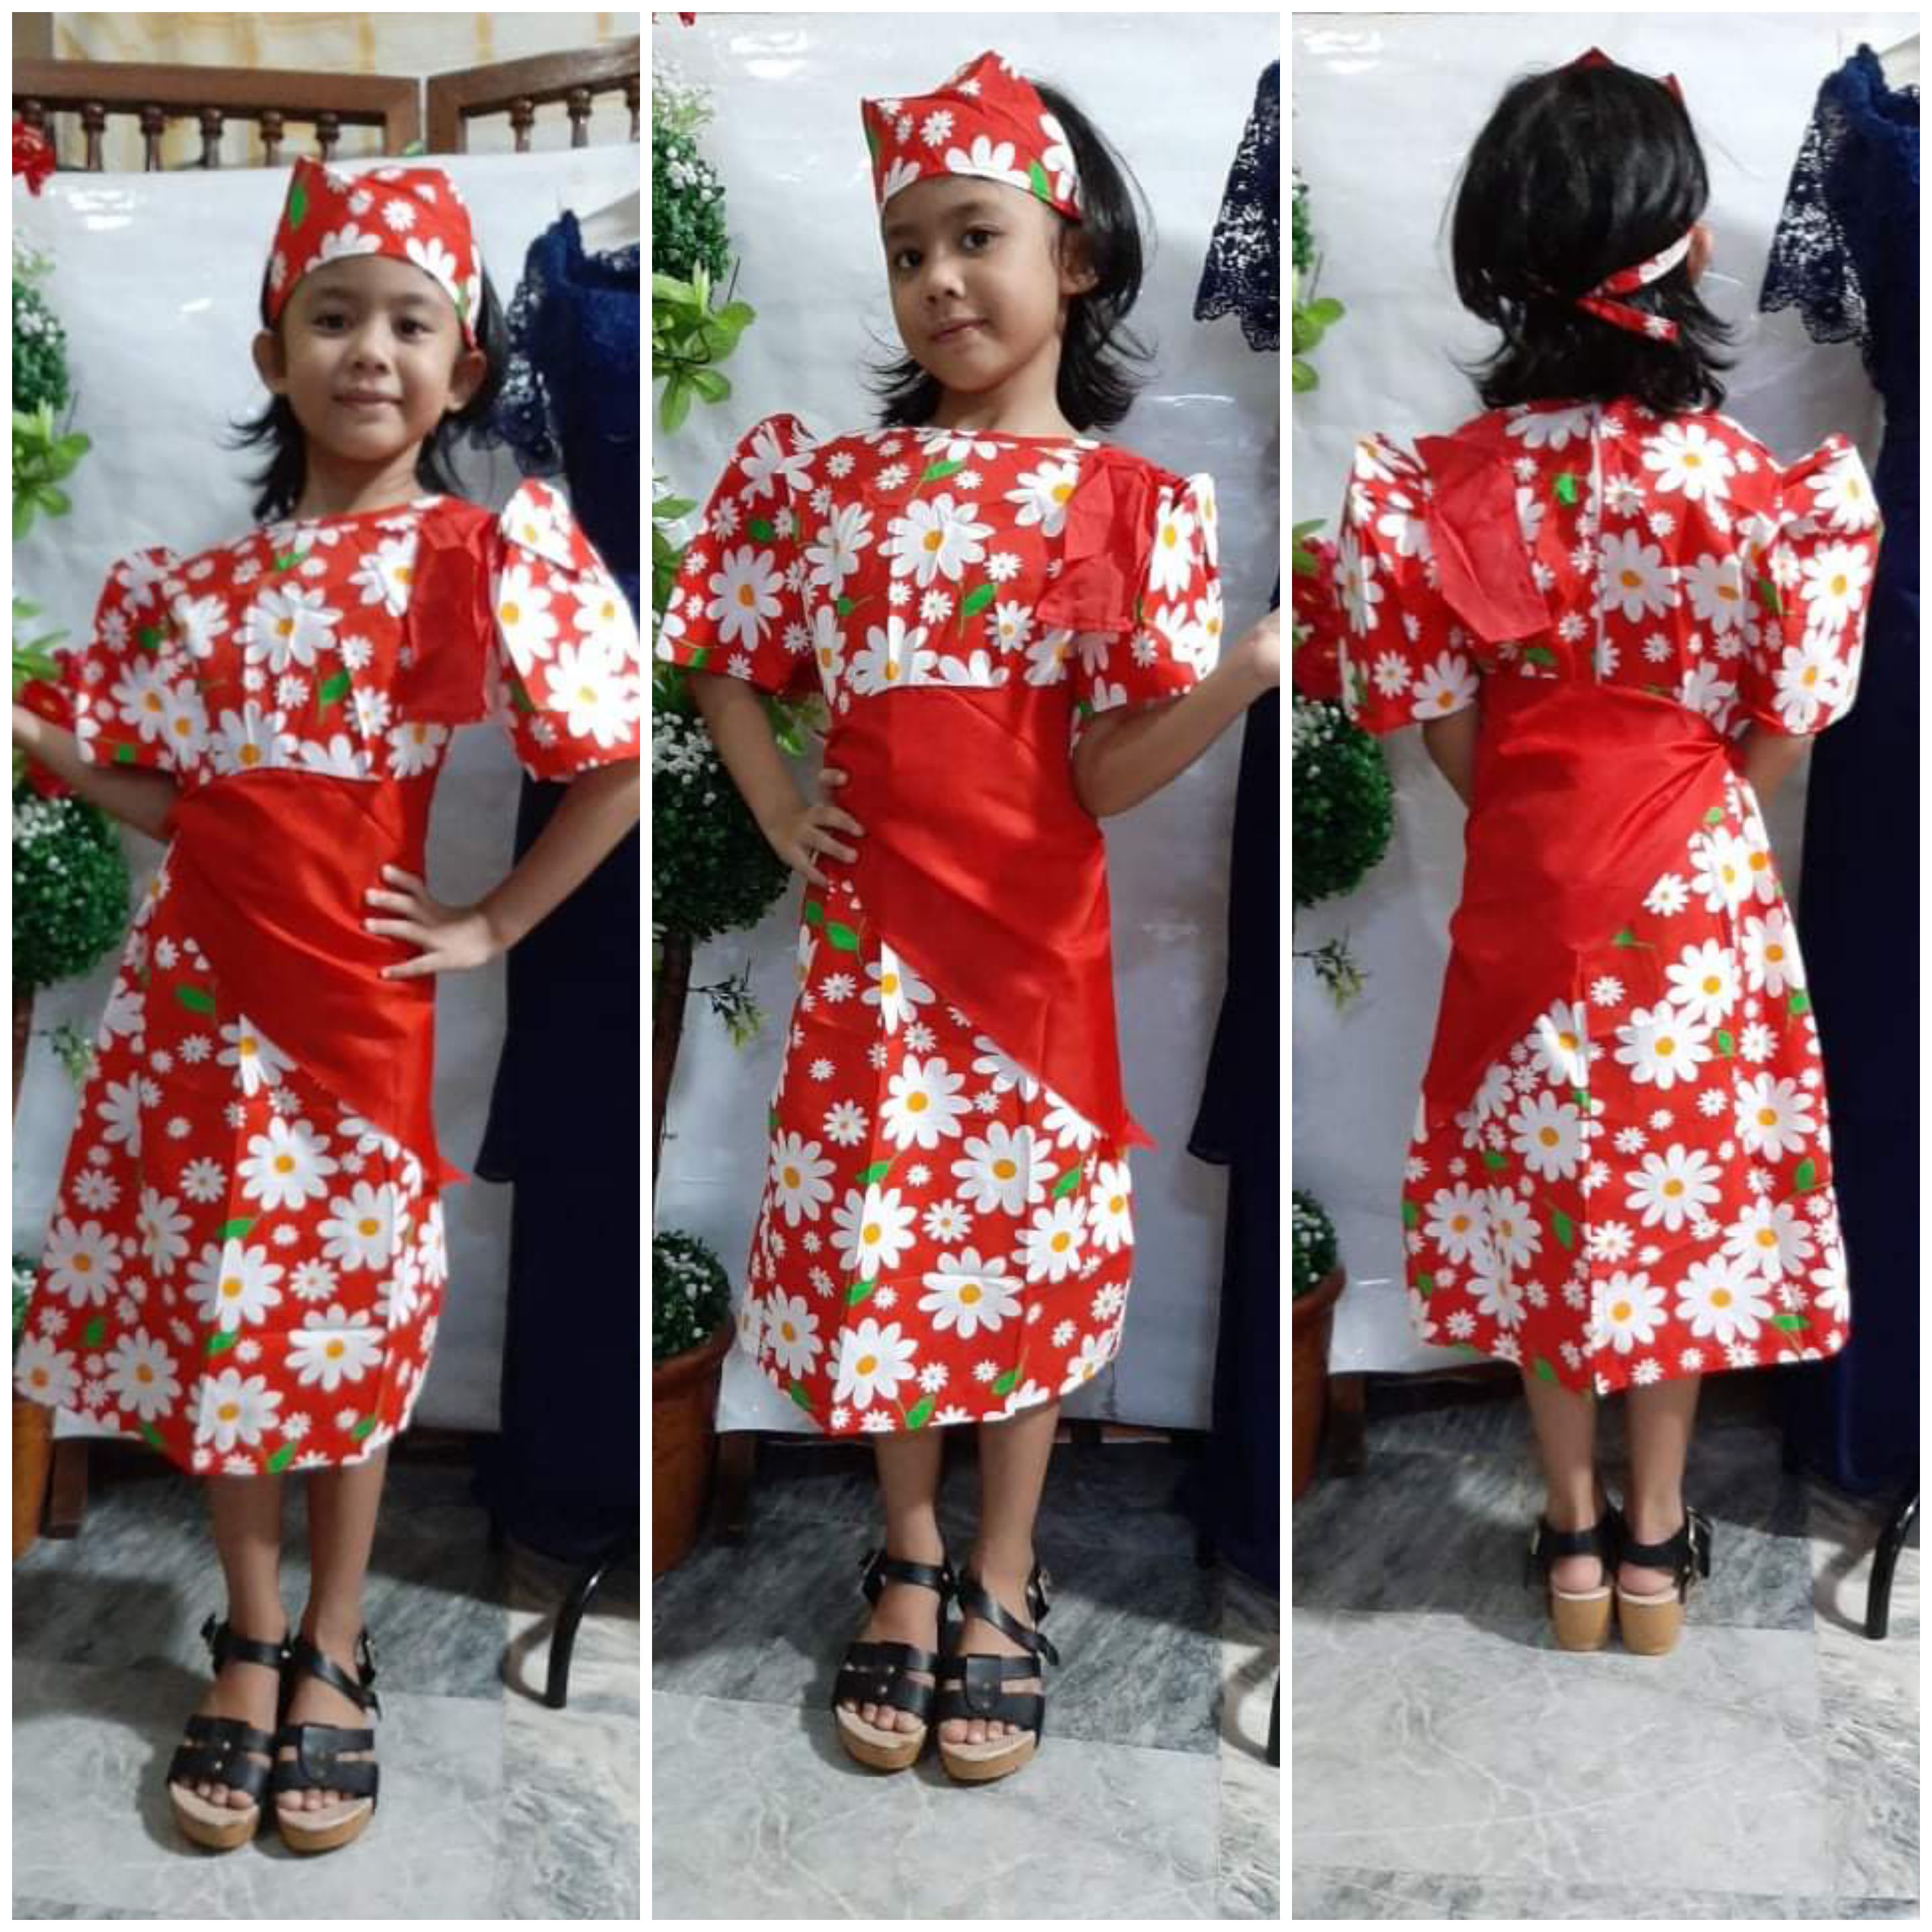 Traditional Kids Filipiniana Dress For Girl Ages From 5 Up To 10 Years Old.  Featuring A Maria Clara Cuff With Turban, Apron And A Sash. Best Wear On  Virtual As Well As